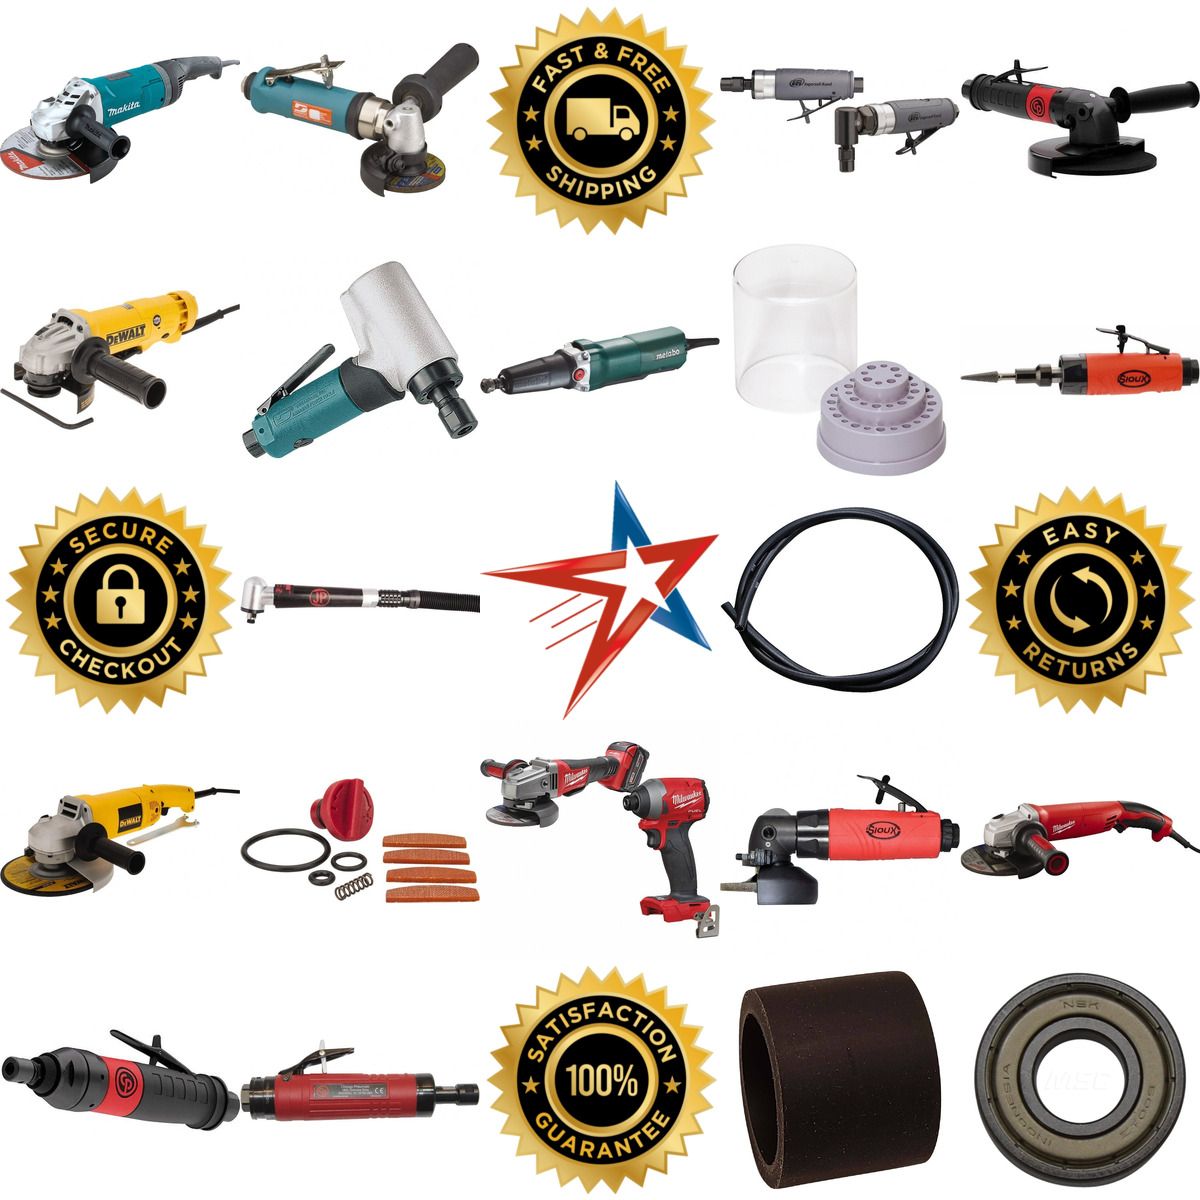 A selection of Power Grinders products on GoVets